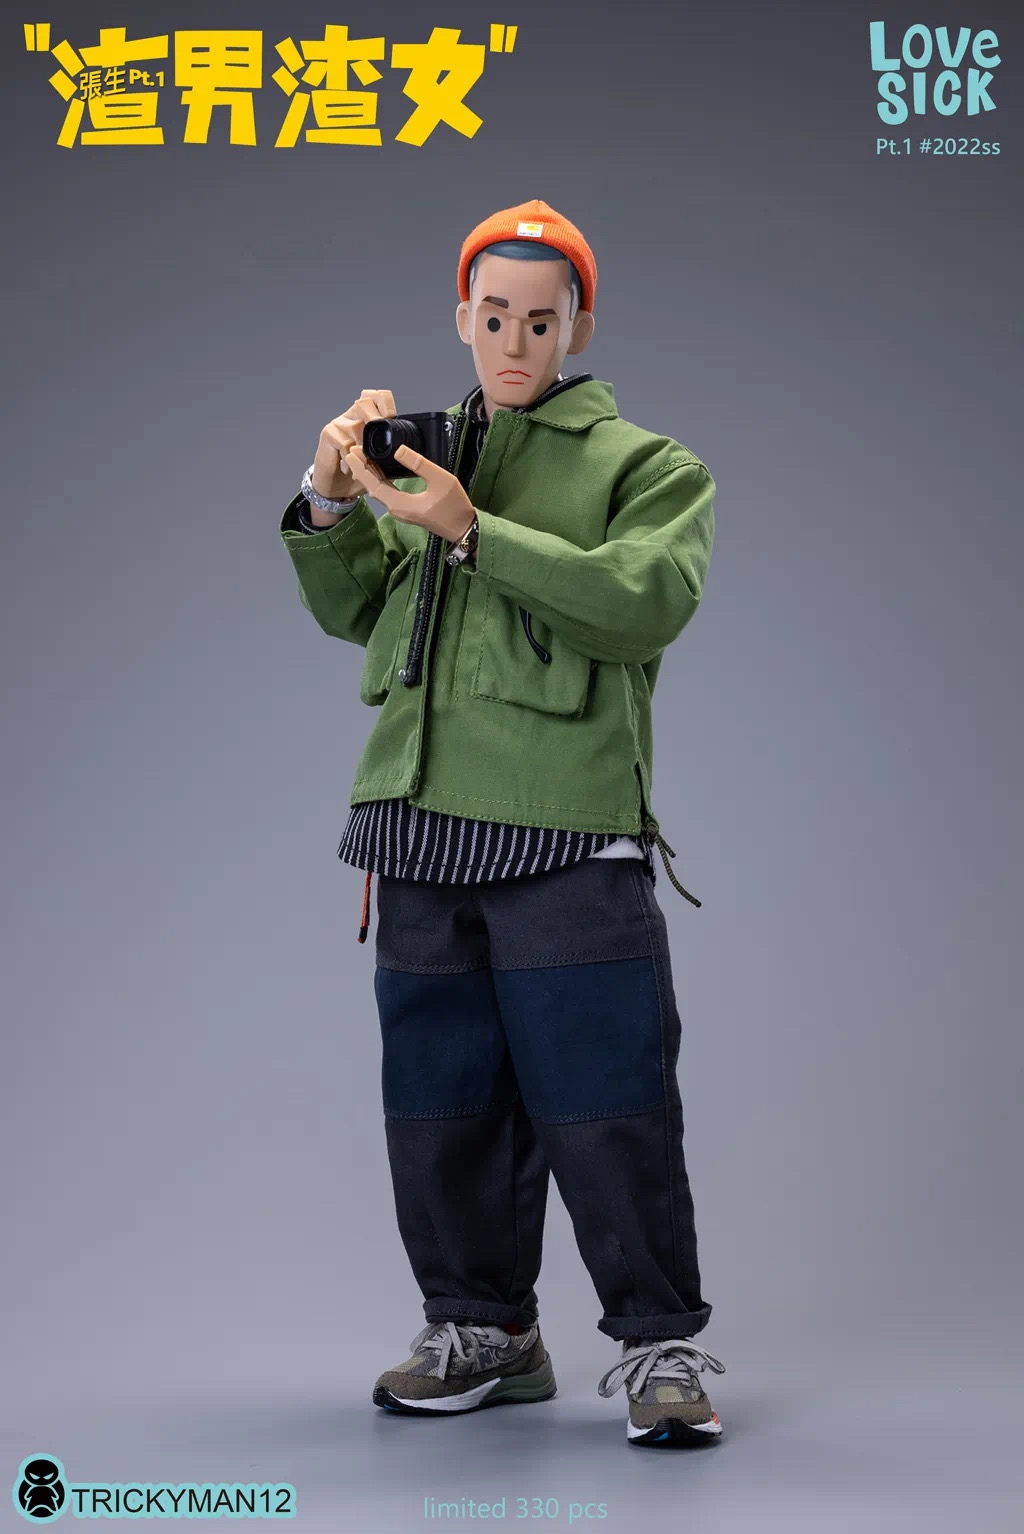 trickyMan12 - NEW PRODUCT: Trickyman12: 1/6 "Scumbag" Pt.1 Zhang Sheng 2022ss Action Figure 20292711